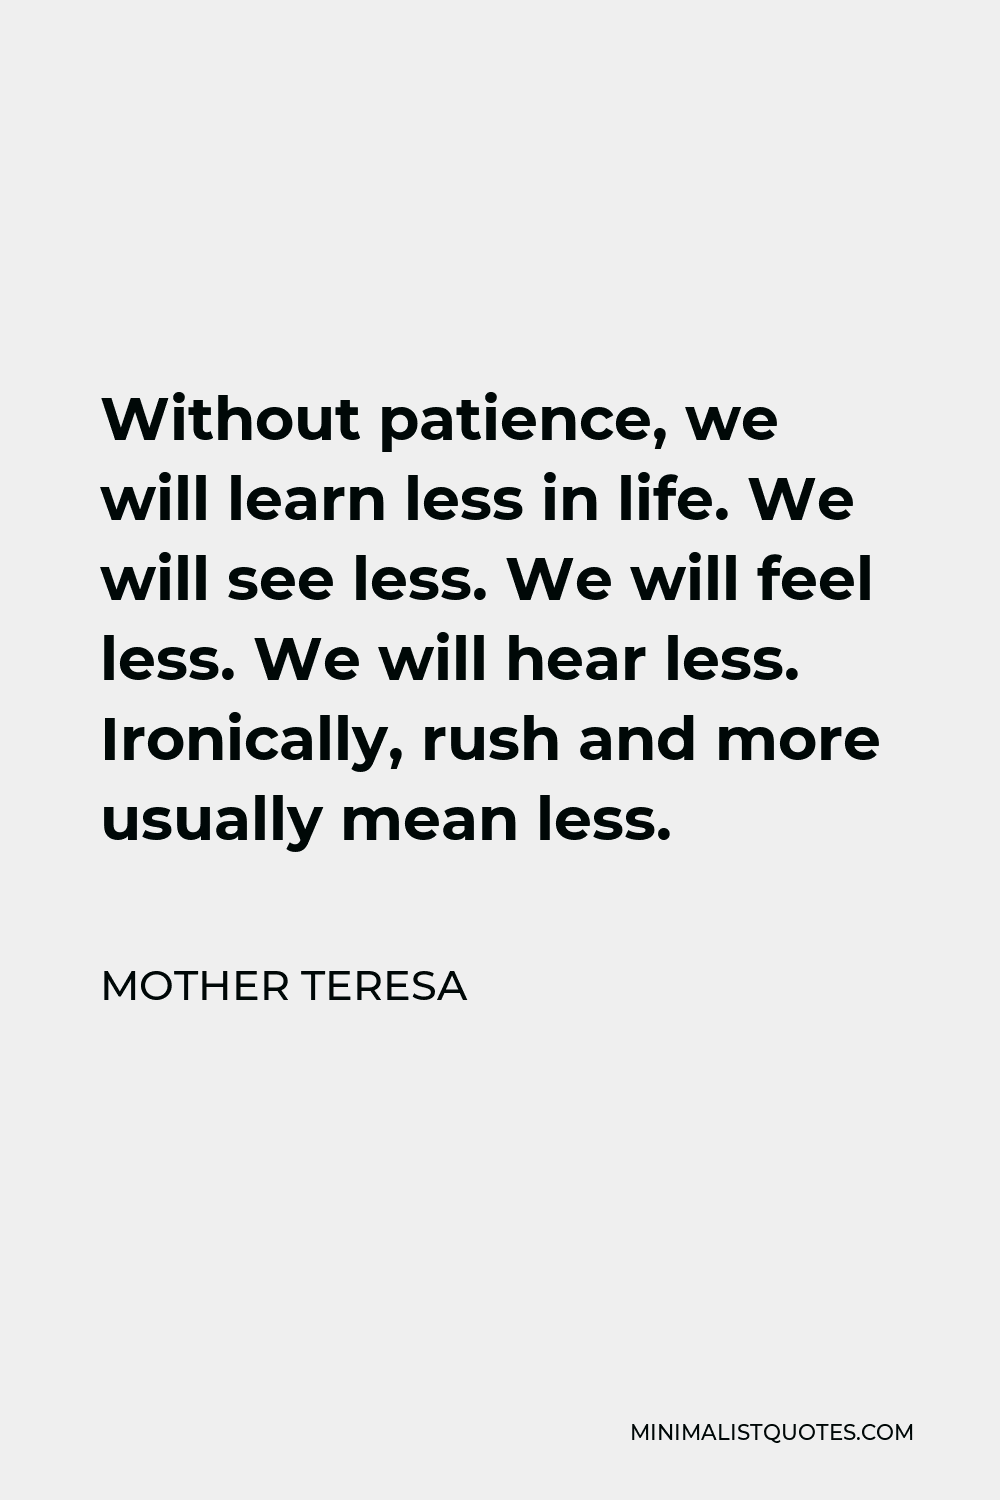 Mother Teresa Quote - Without patience, we will learn less in life. We will see less. We will feel less. We will hear less. Ironically, rush and more usually mean less.